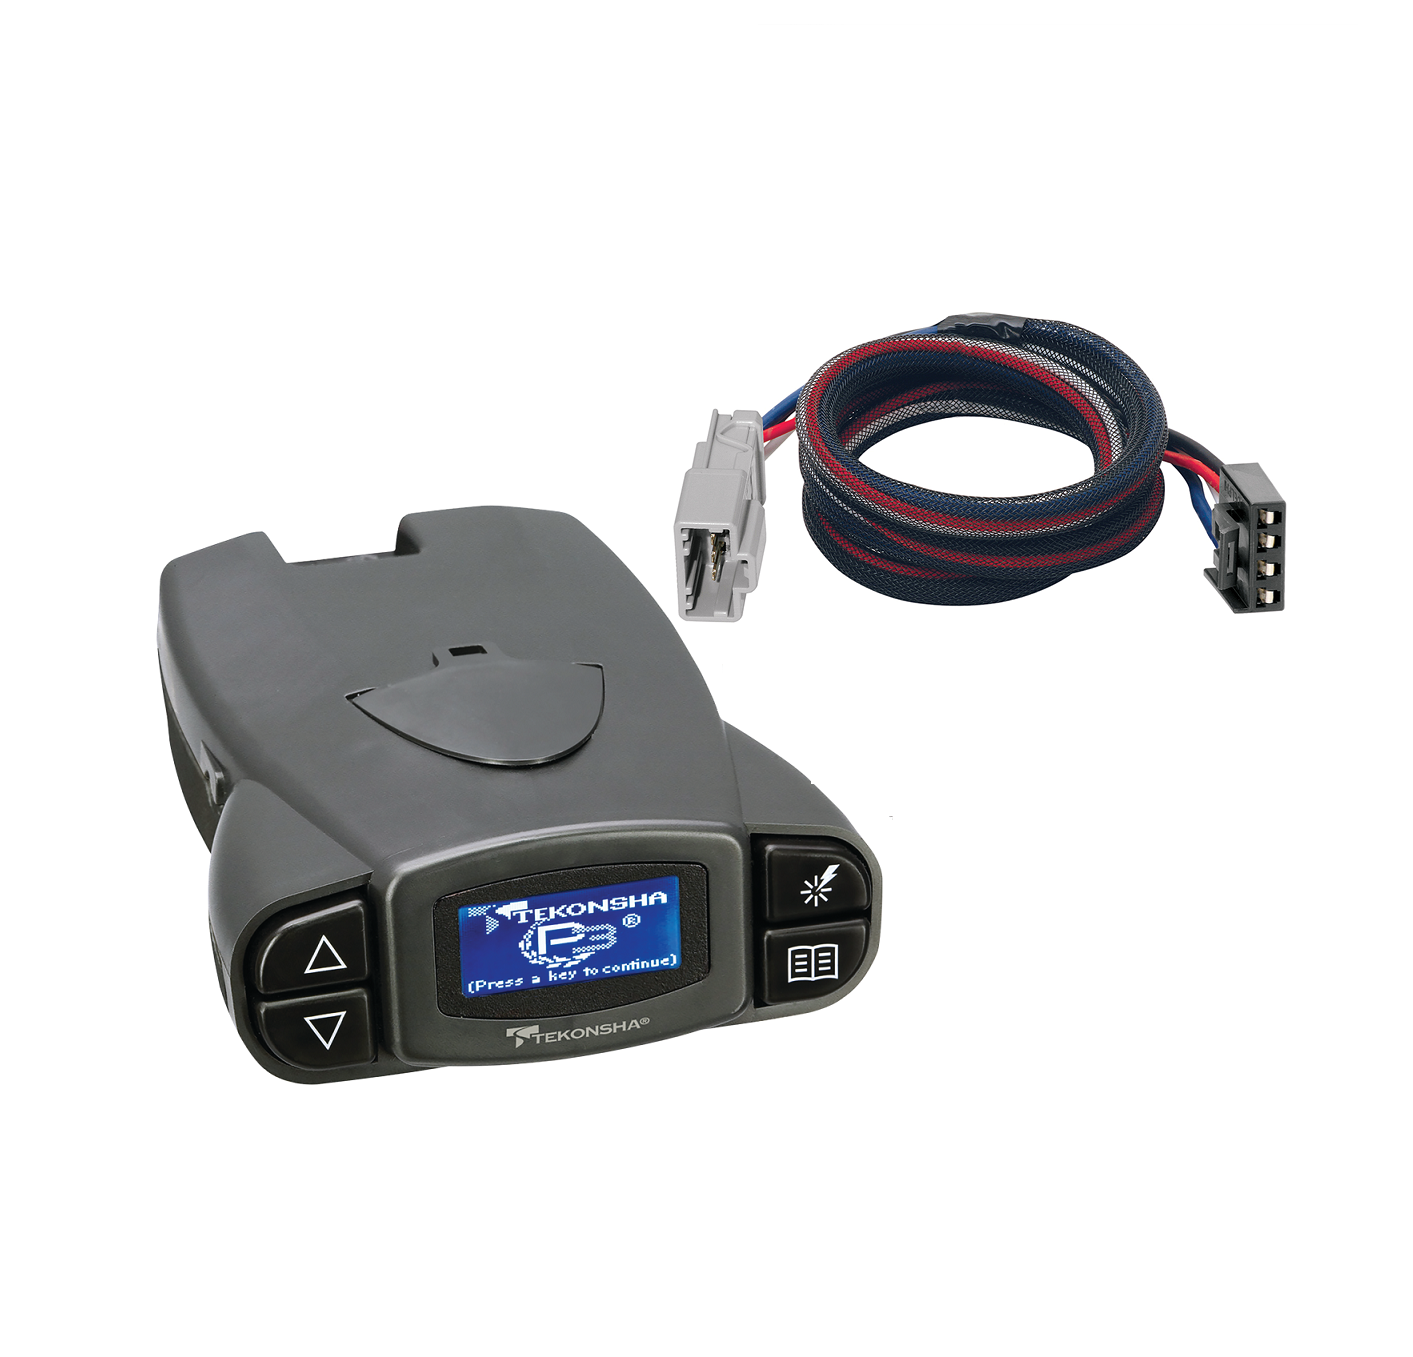 2009-2024 Honda Pilot 3070 Tekonsha Prodigy P3 Proportional Brake Controller for Trailers with 1-4 Axles 90195 w/ Plug-N-Play Wire